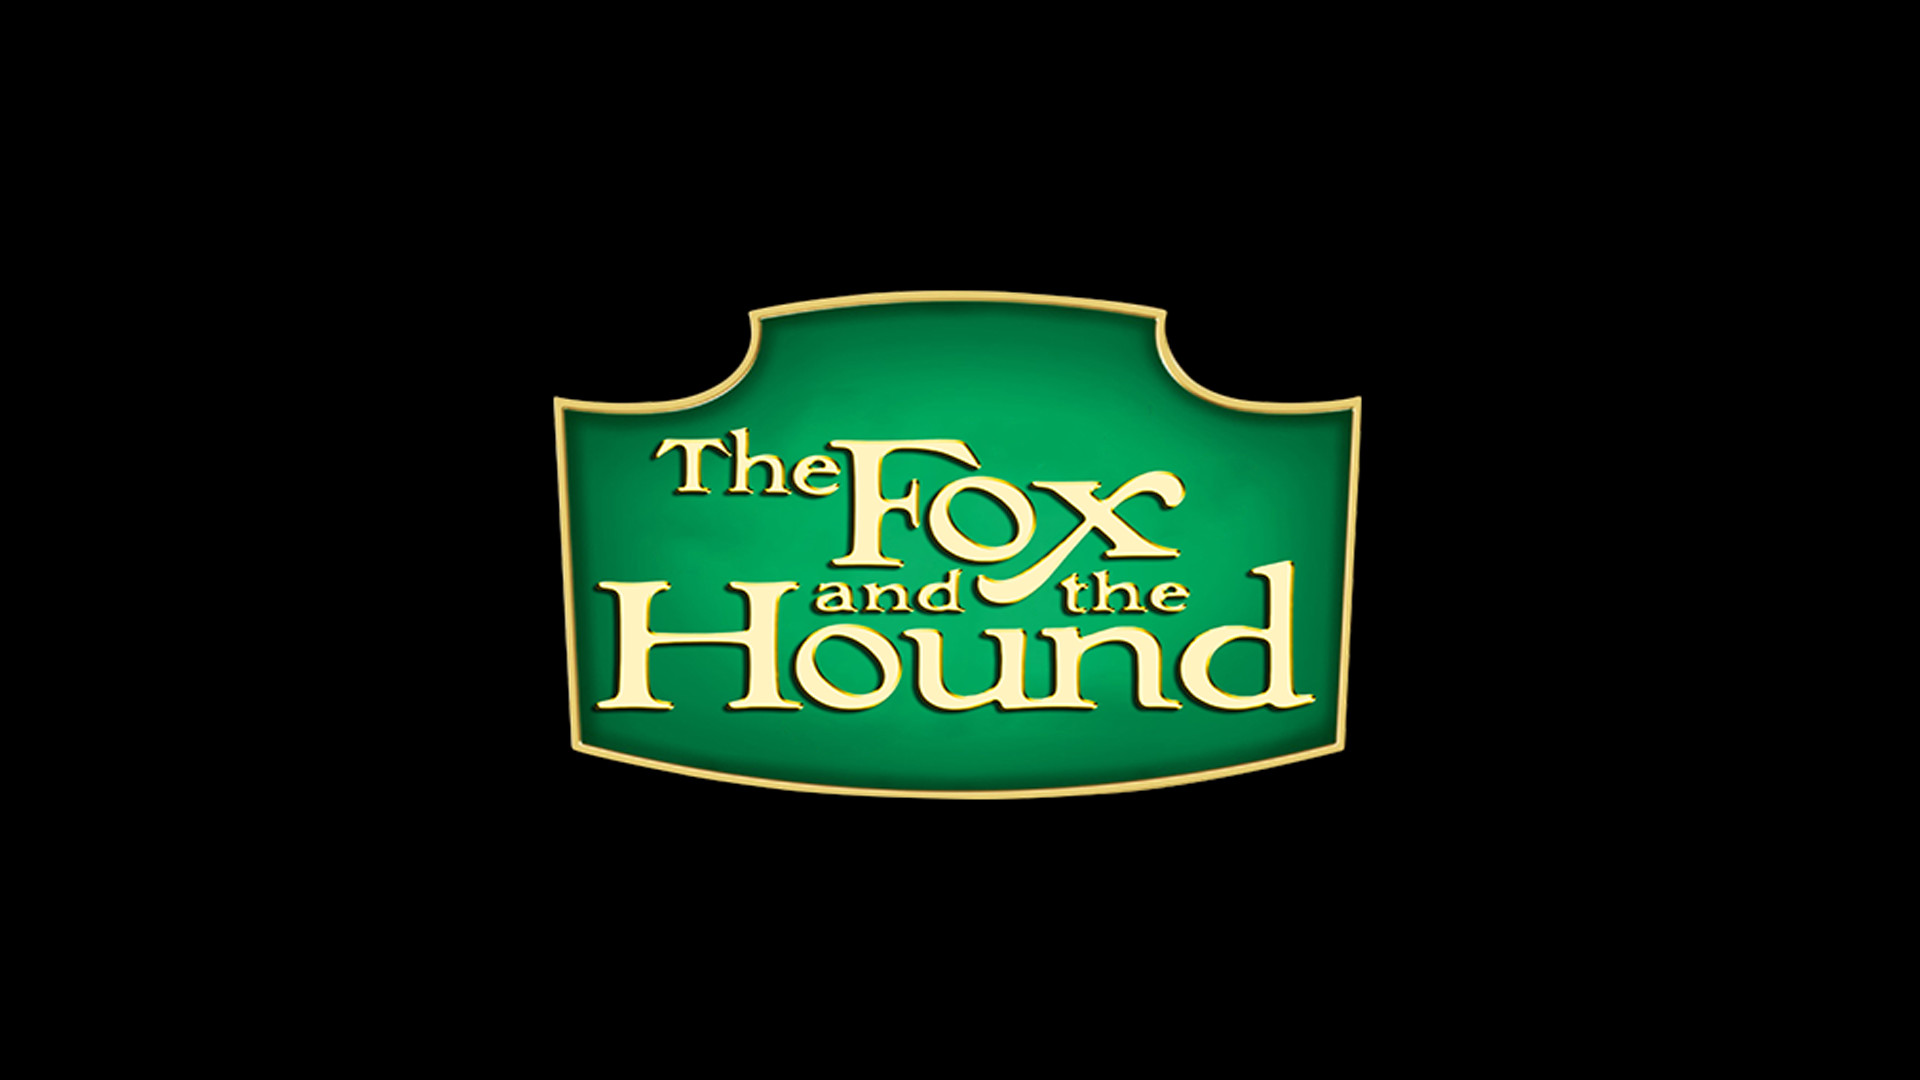 1920x1080 The Fox and The Hound, A 'The Fox and The Hound' wallpaper.